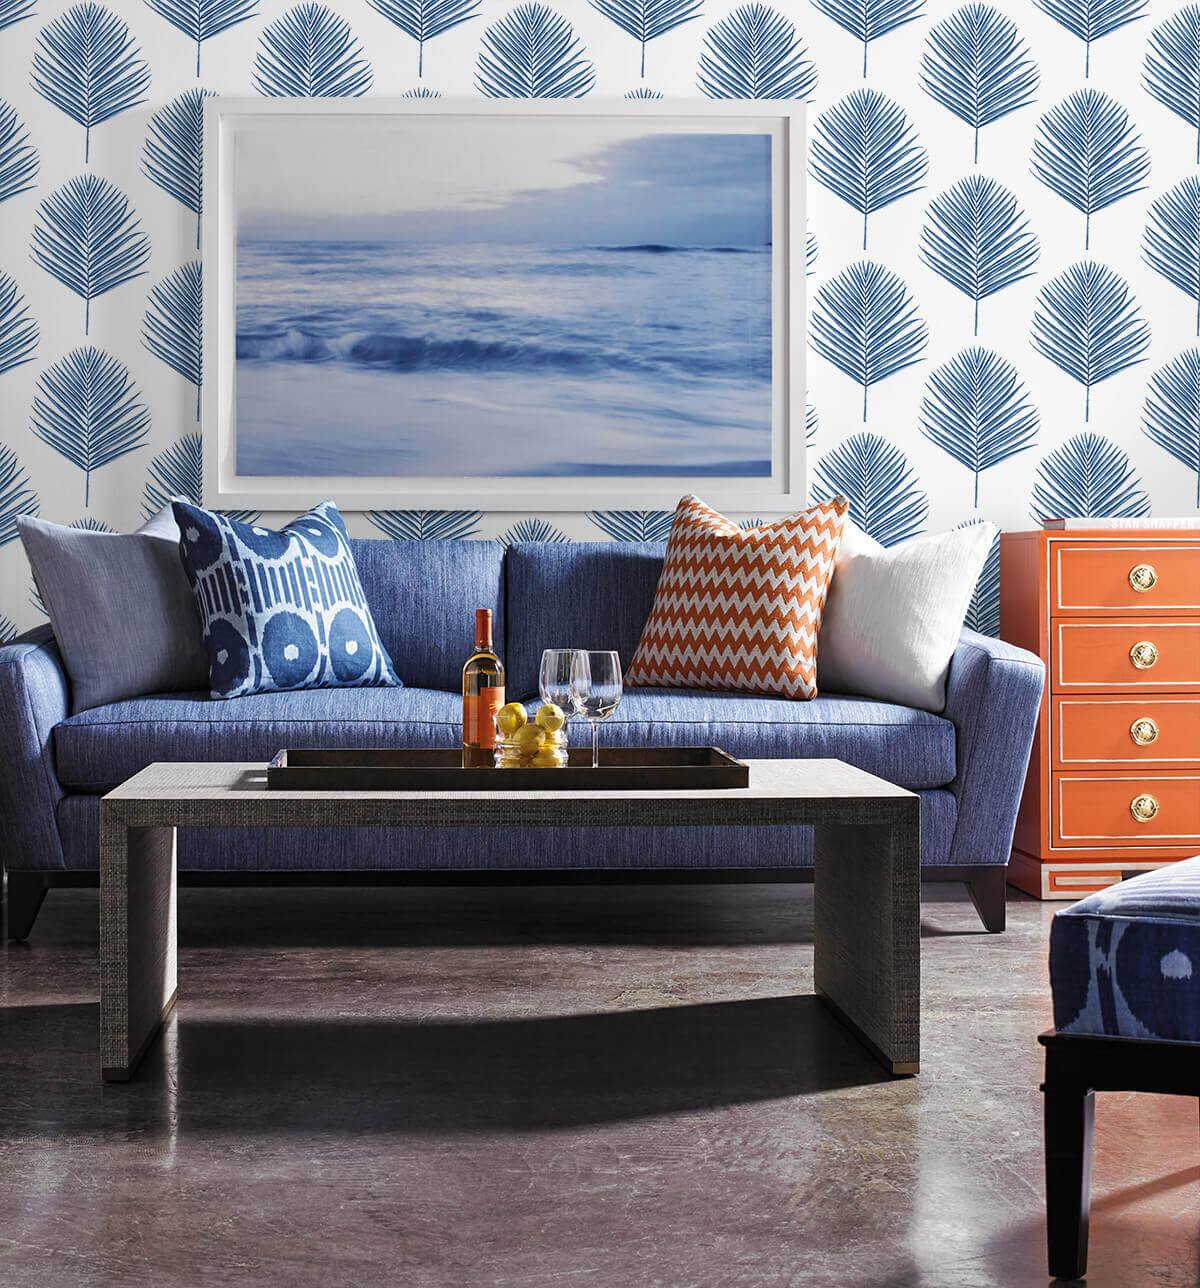 My Favorite Coastal Peel and Stick Wallpapers  The Wicker House